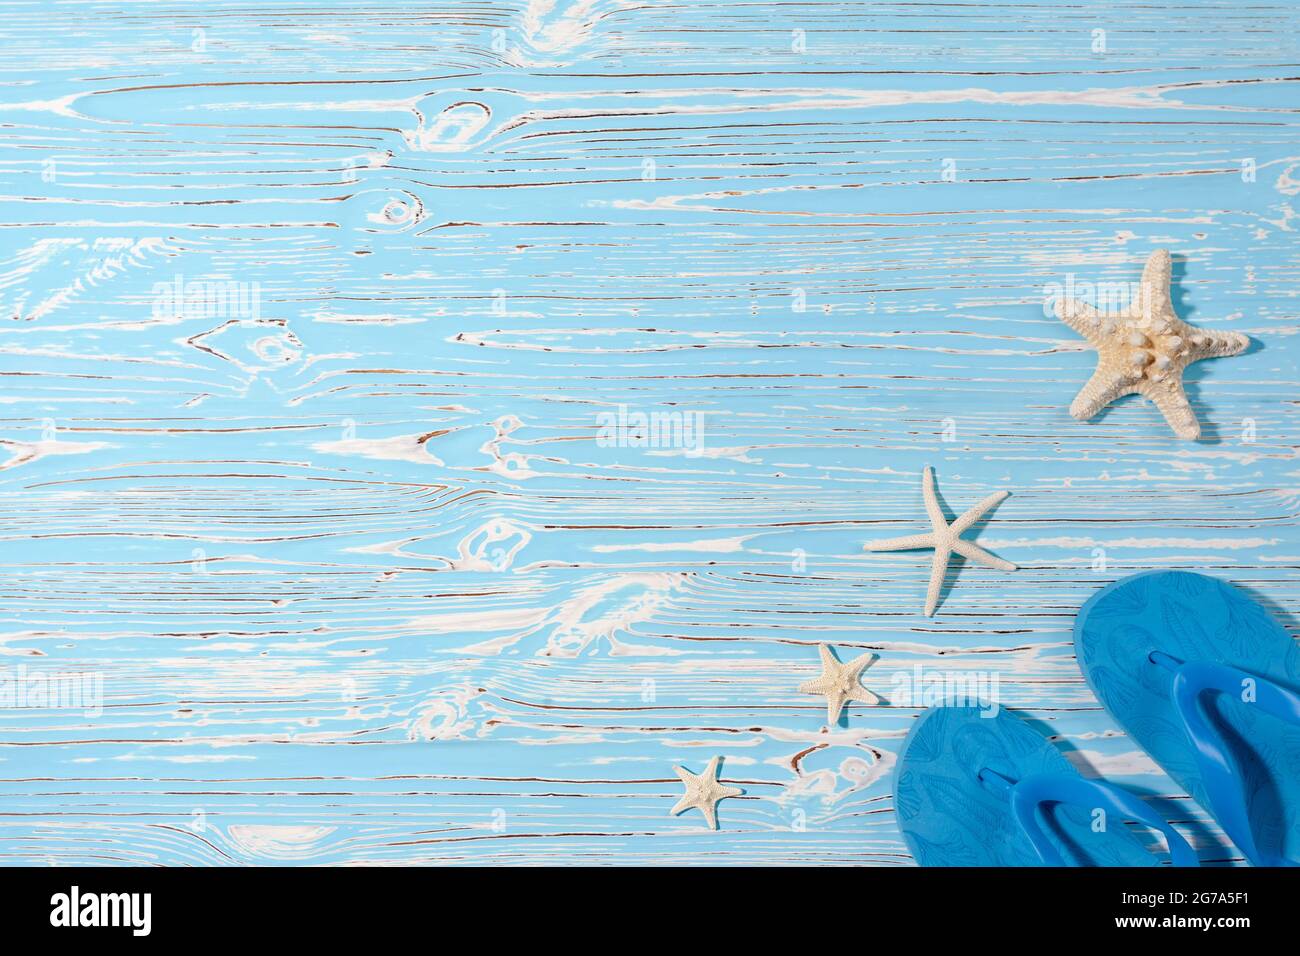 Sea stars and rubber beach blue flip flops on blue wooden background Stock Photo